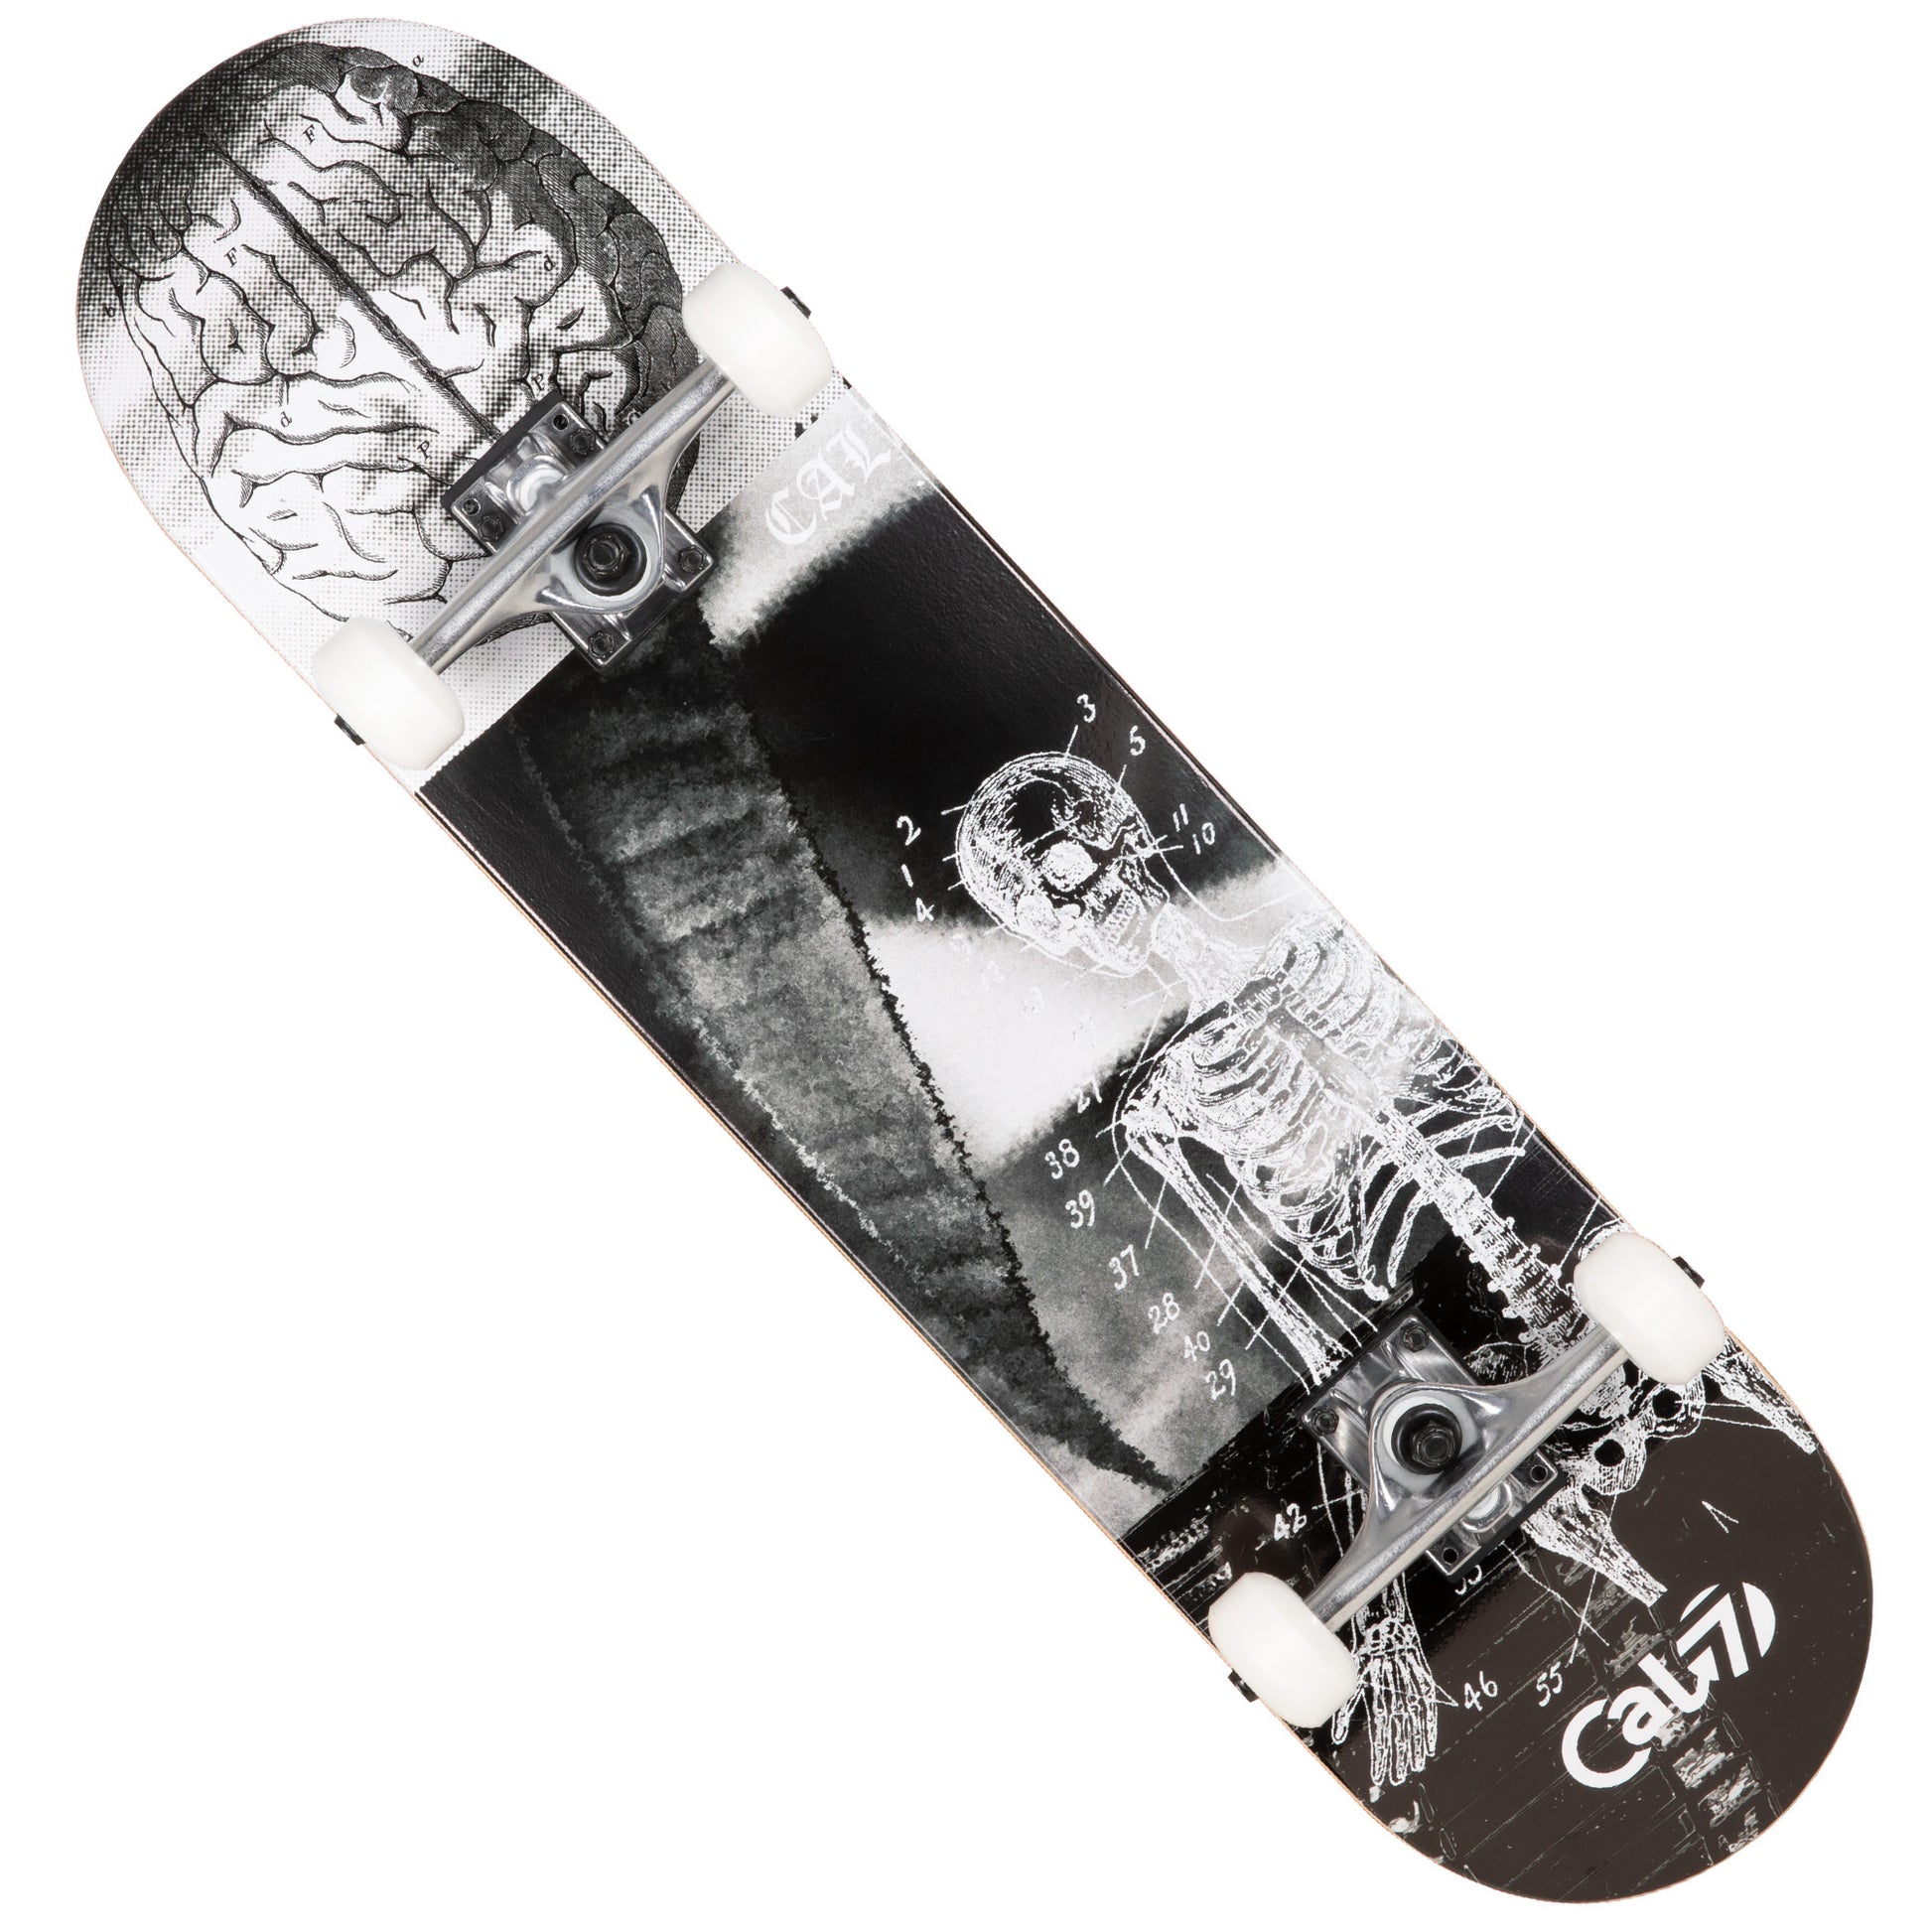 black and white Cal 7 complete 8-inch Anatomy skateboard deck